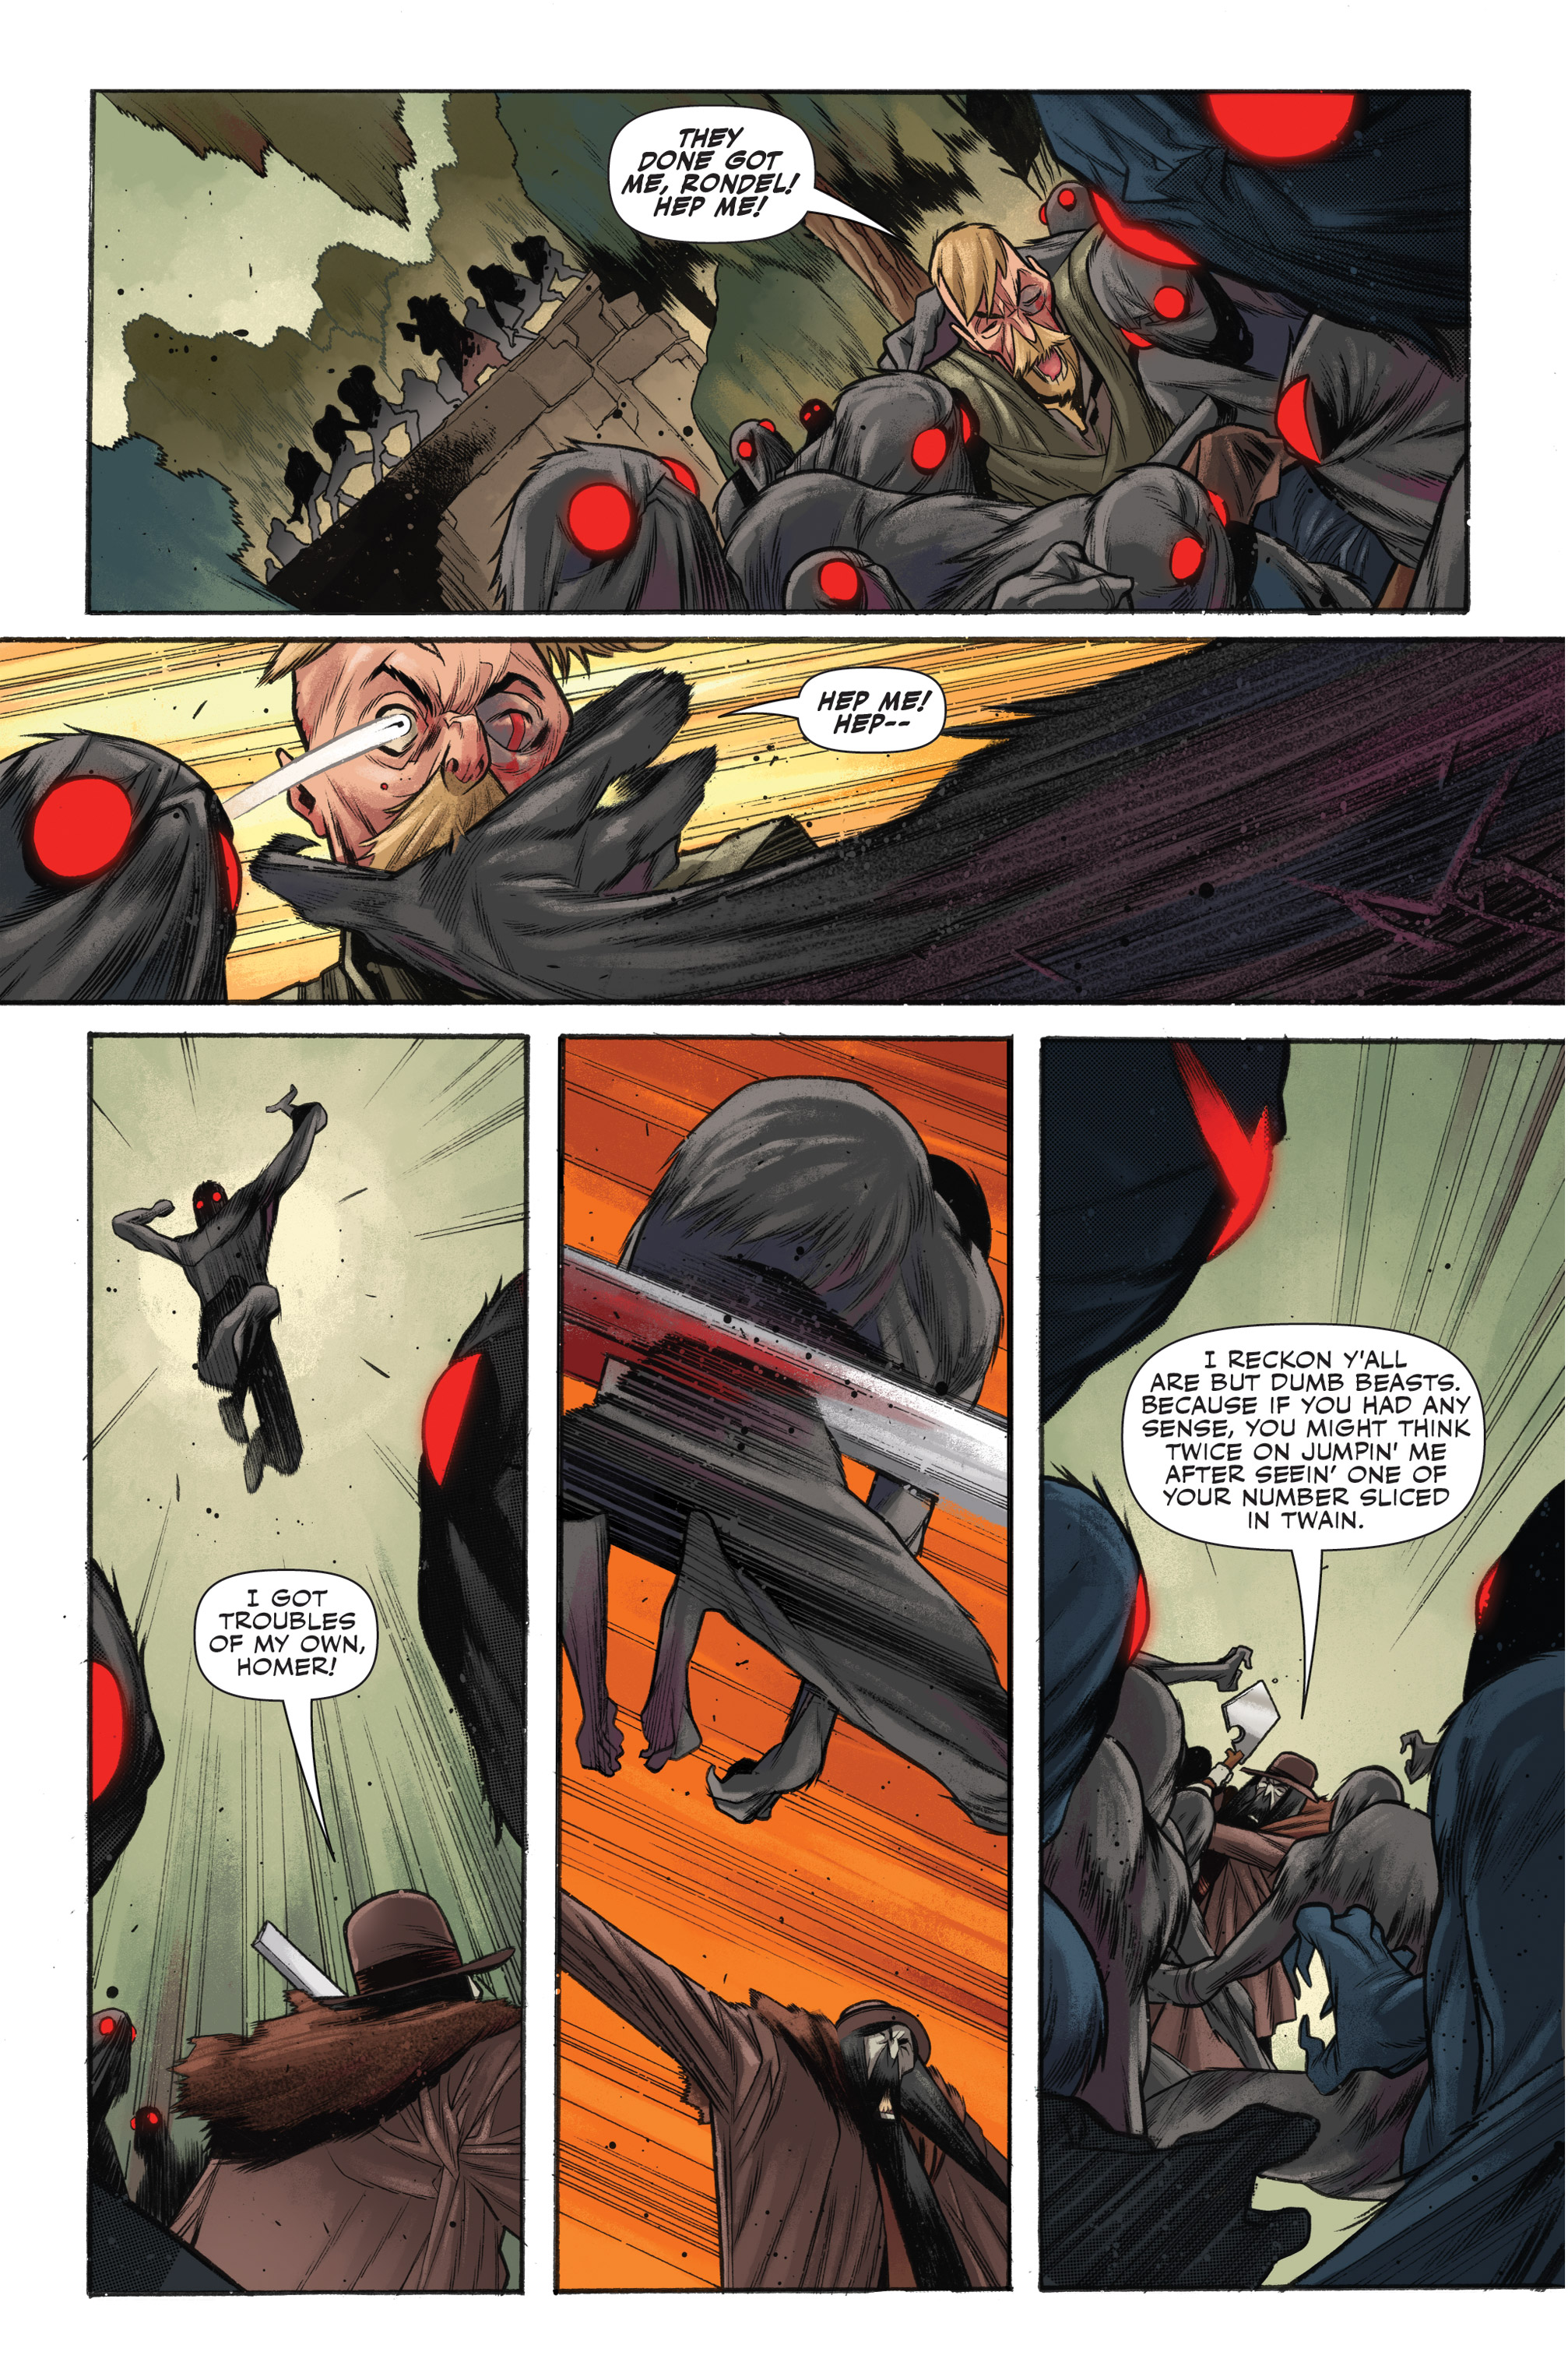 Hillbilly: Red-Eyed Witchery From Beyond (2018-): Chapter 2 - Page 4